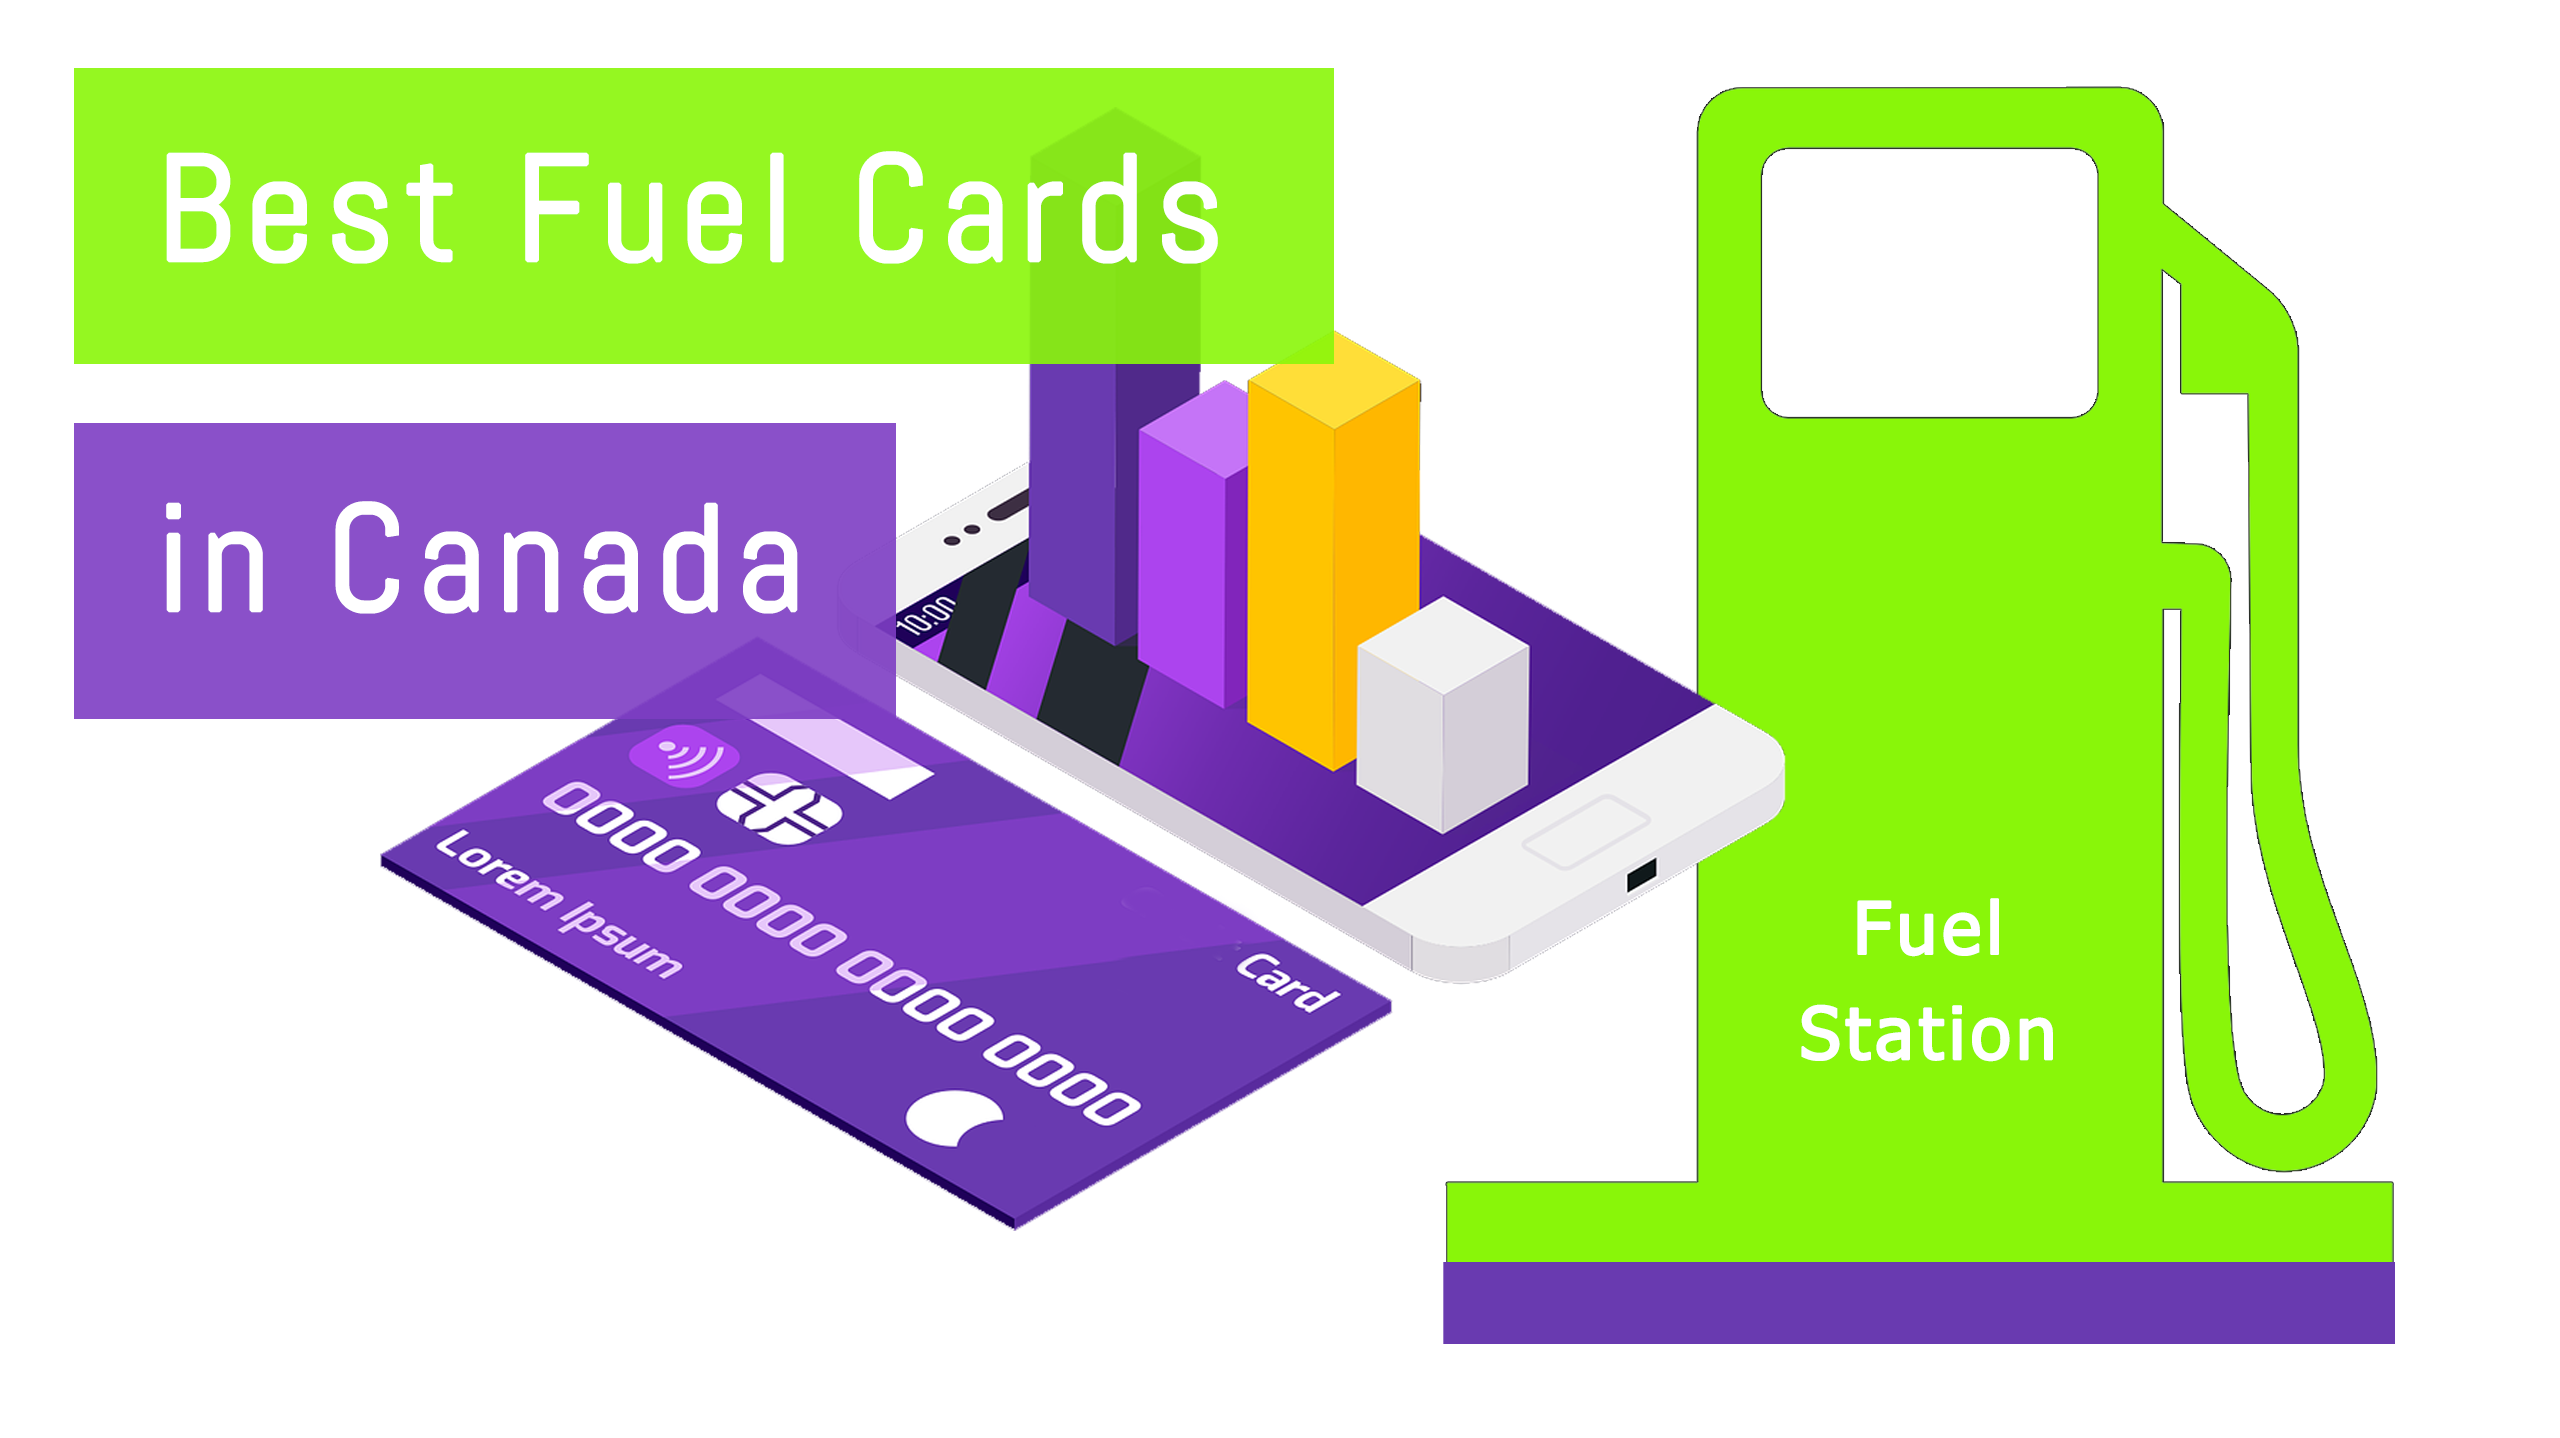 The Best Fuel Cards in Canada